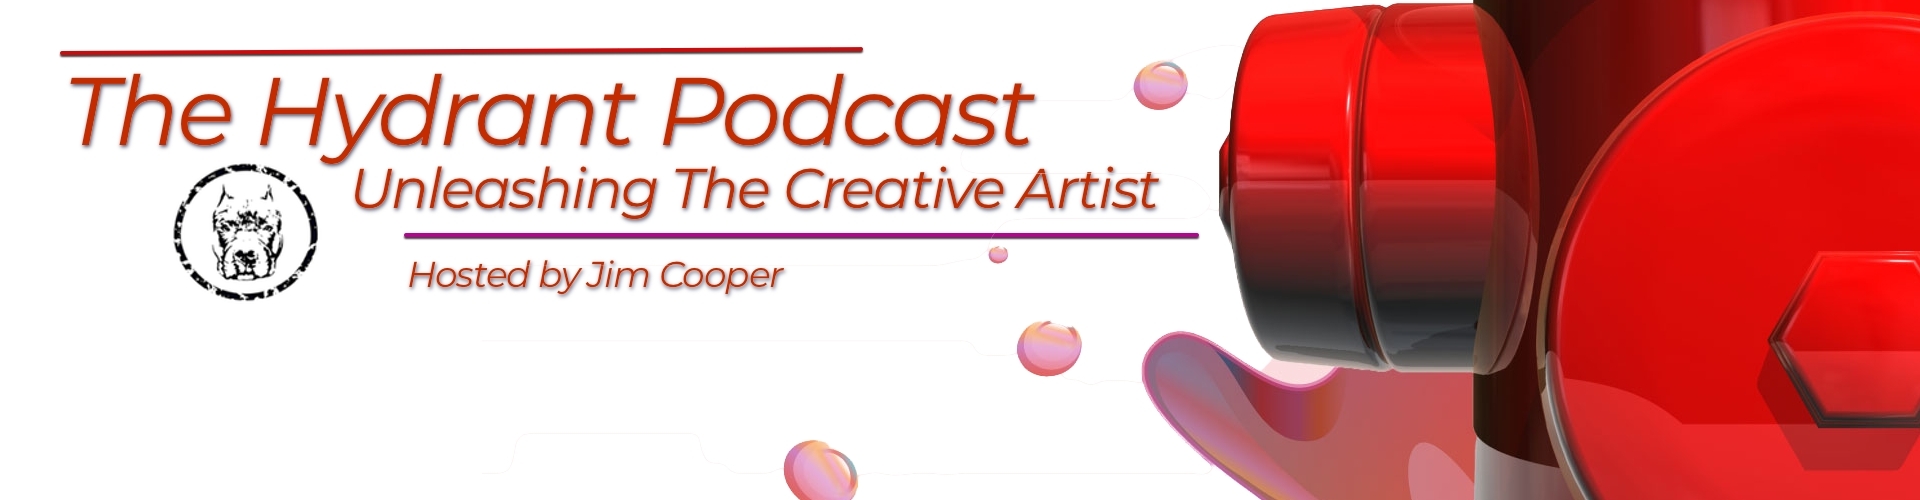 The Hydrant Podcast: Unleashing The Creative Artist